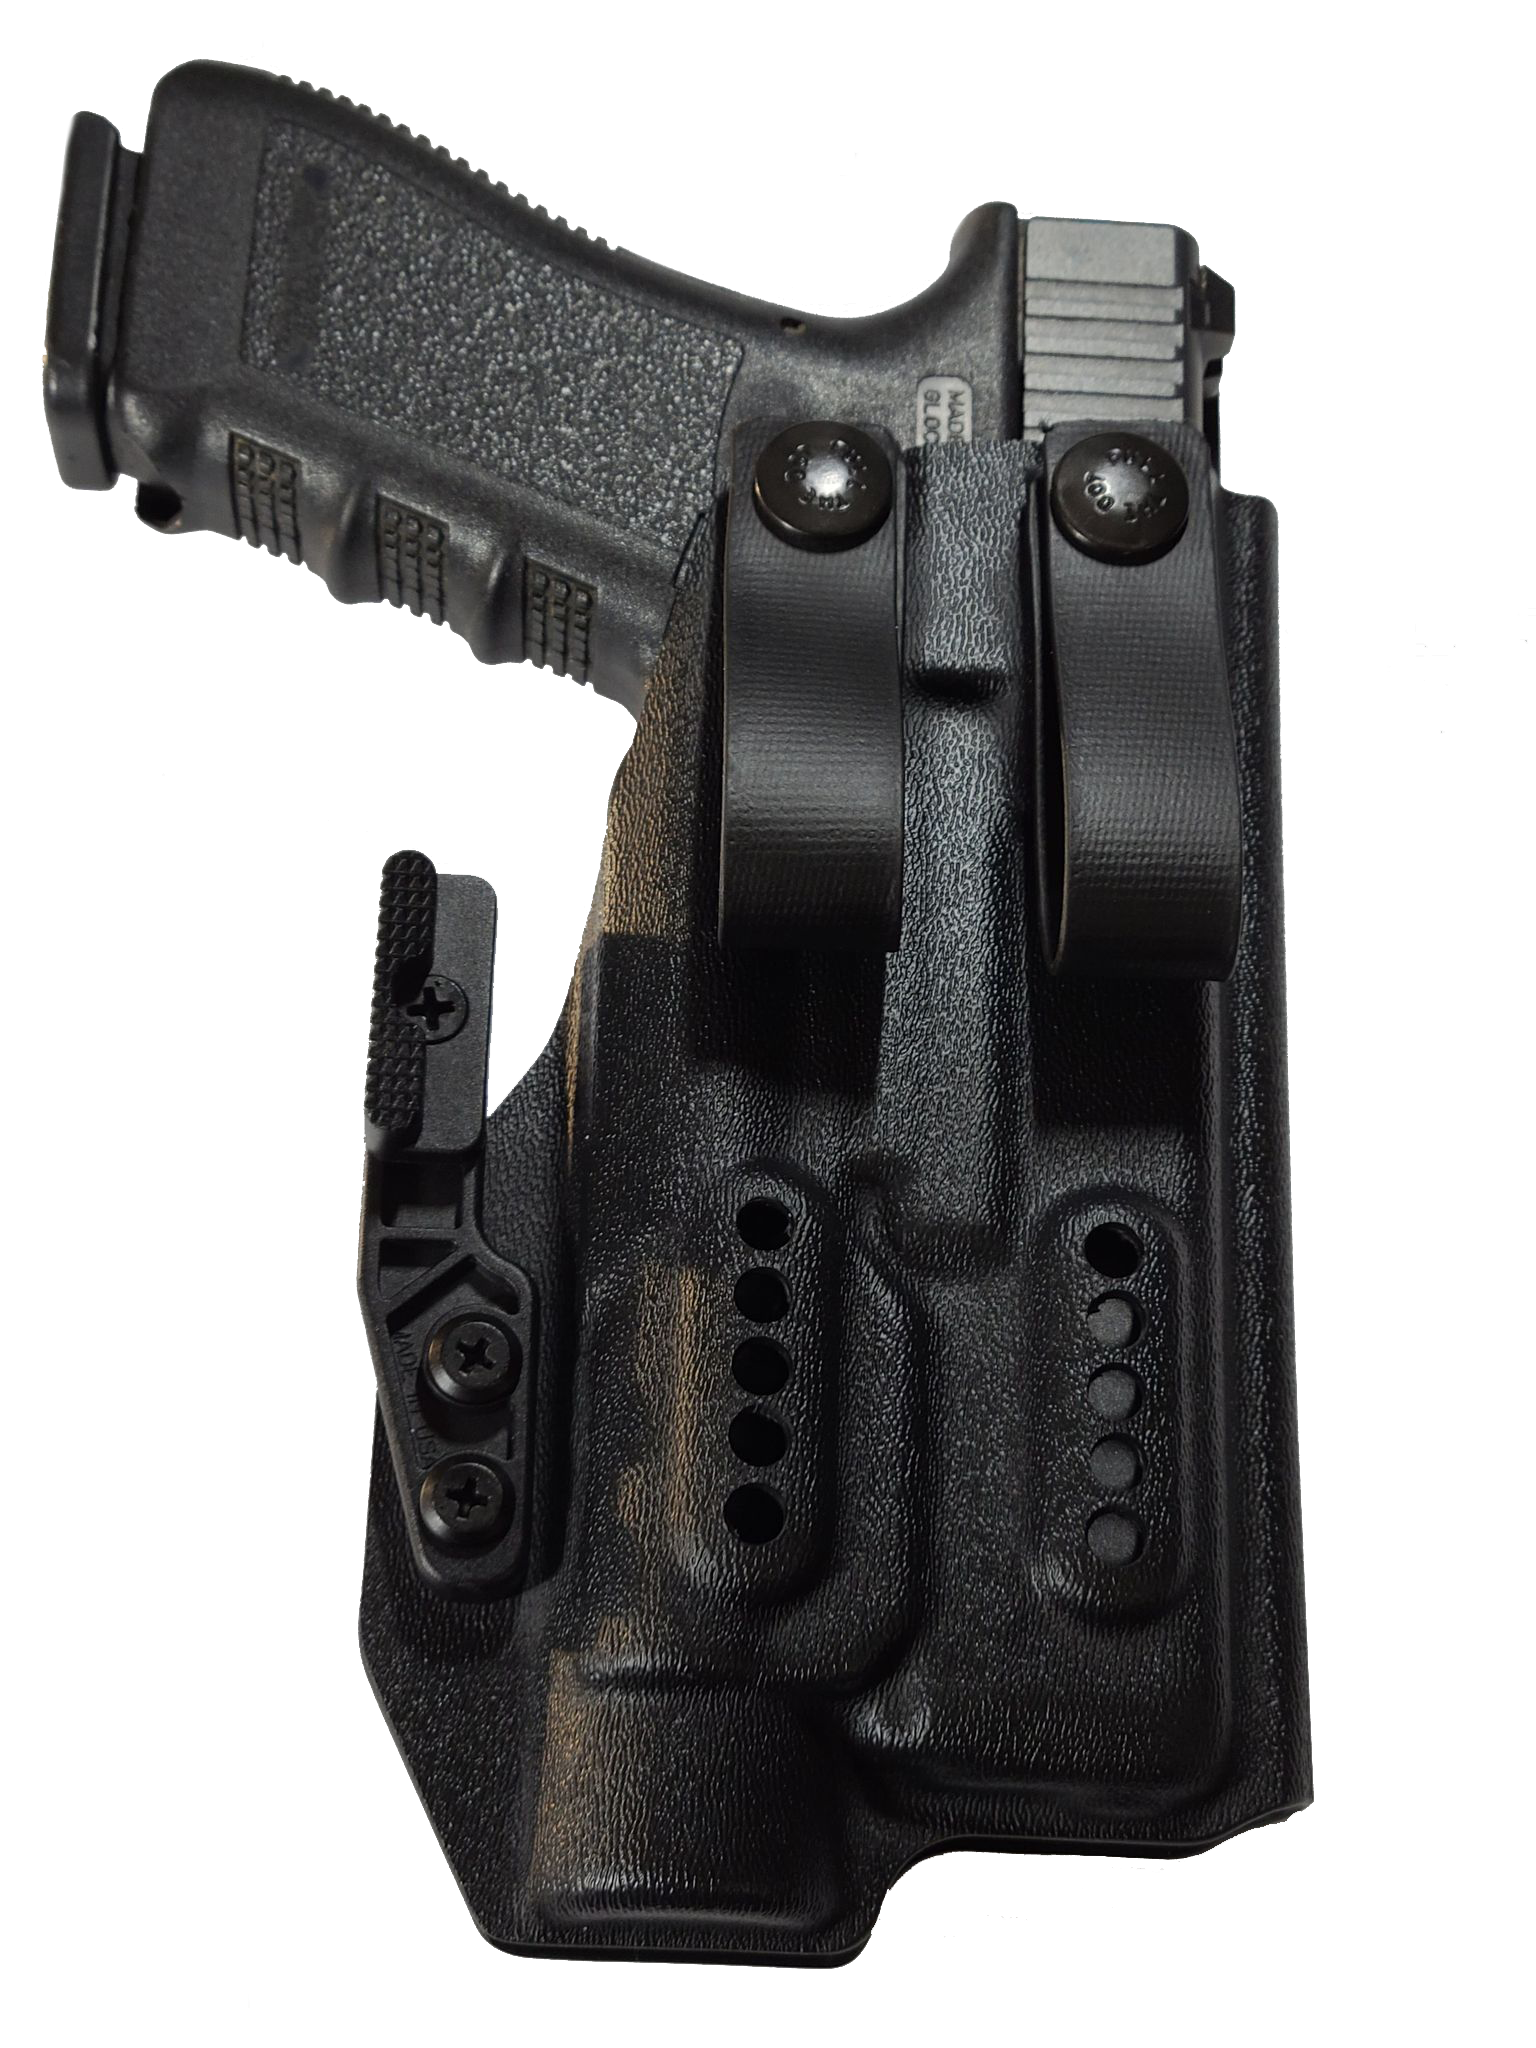 Glock 17 / 22 / 31 IWB Light Bearing Holster TLR1 / TLR1HL With Pull the DOT Soft Loops and Modwing. Tuckable